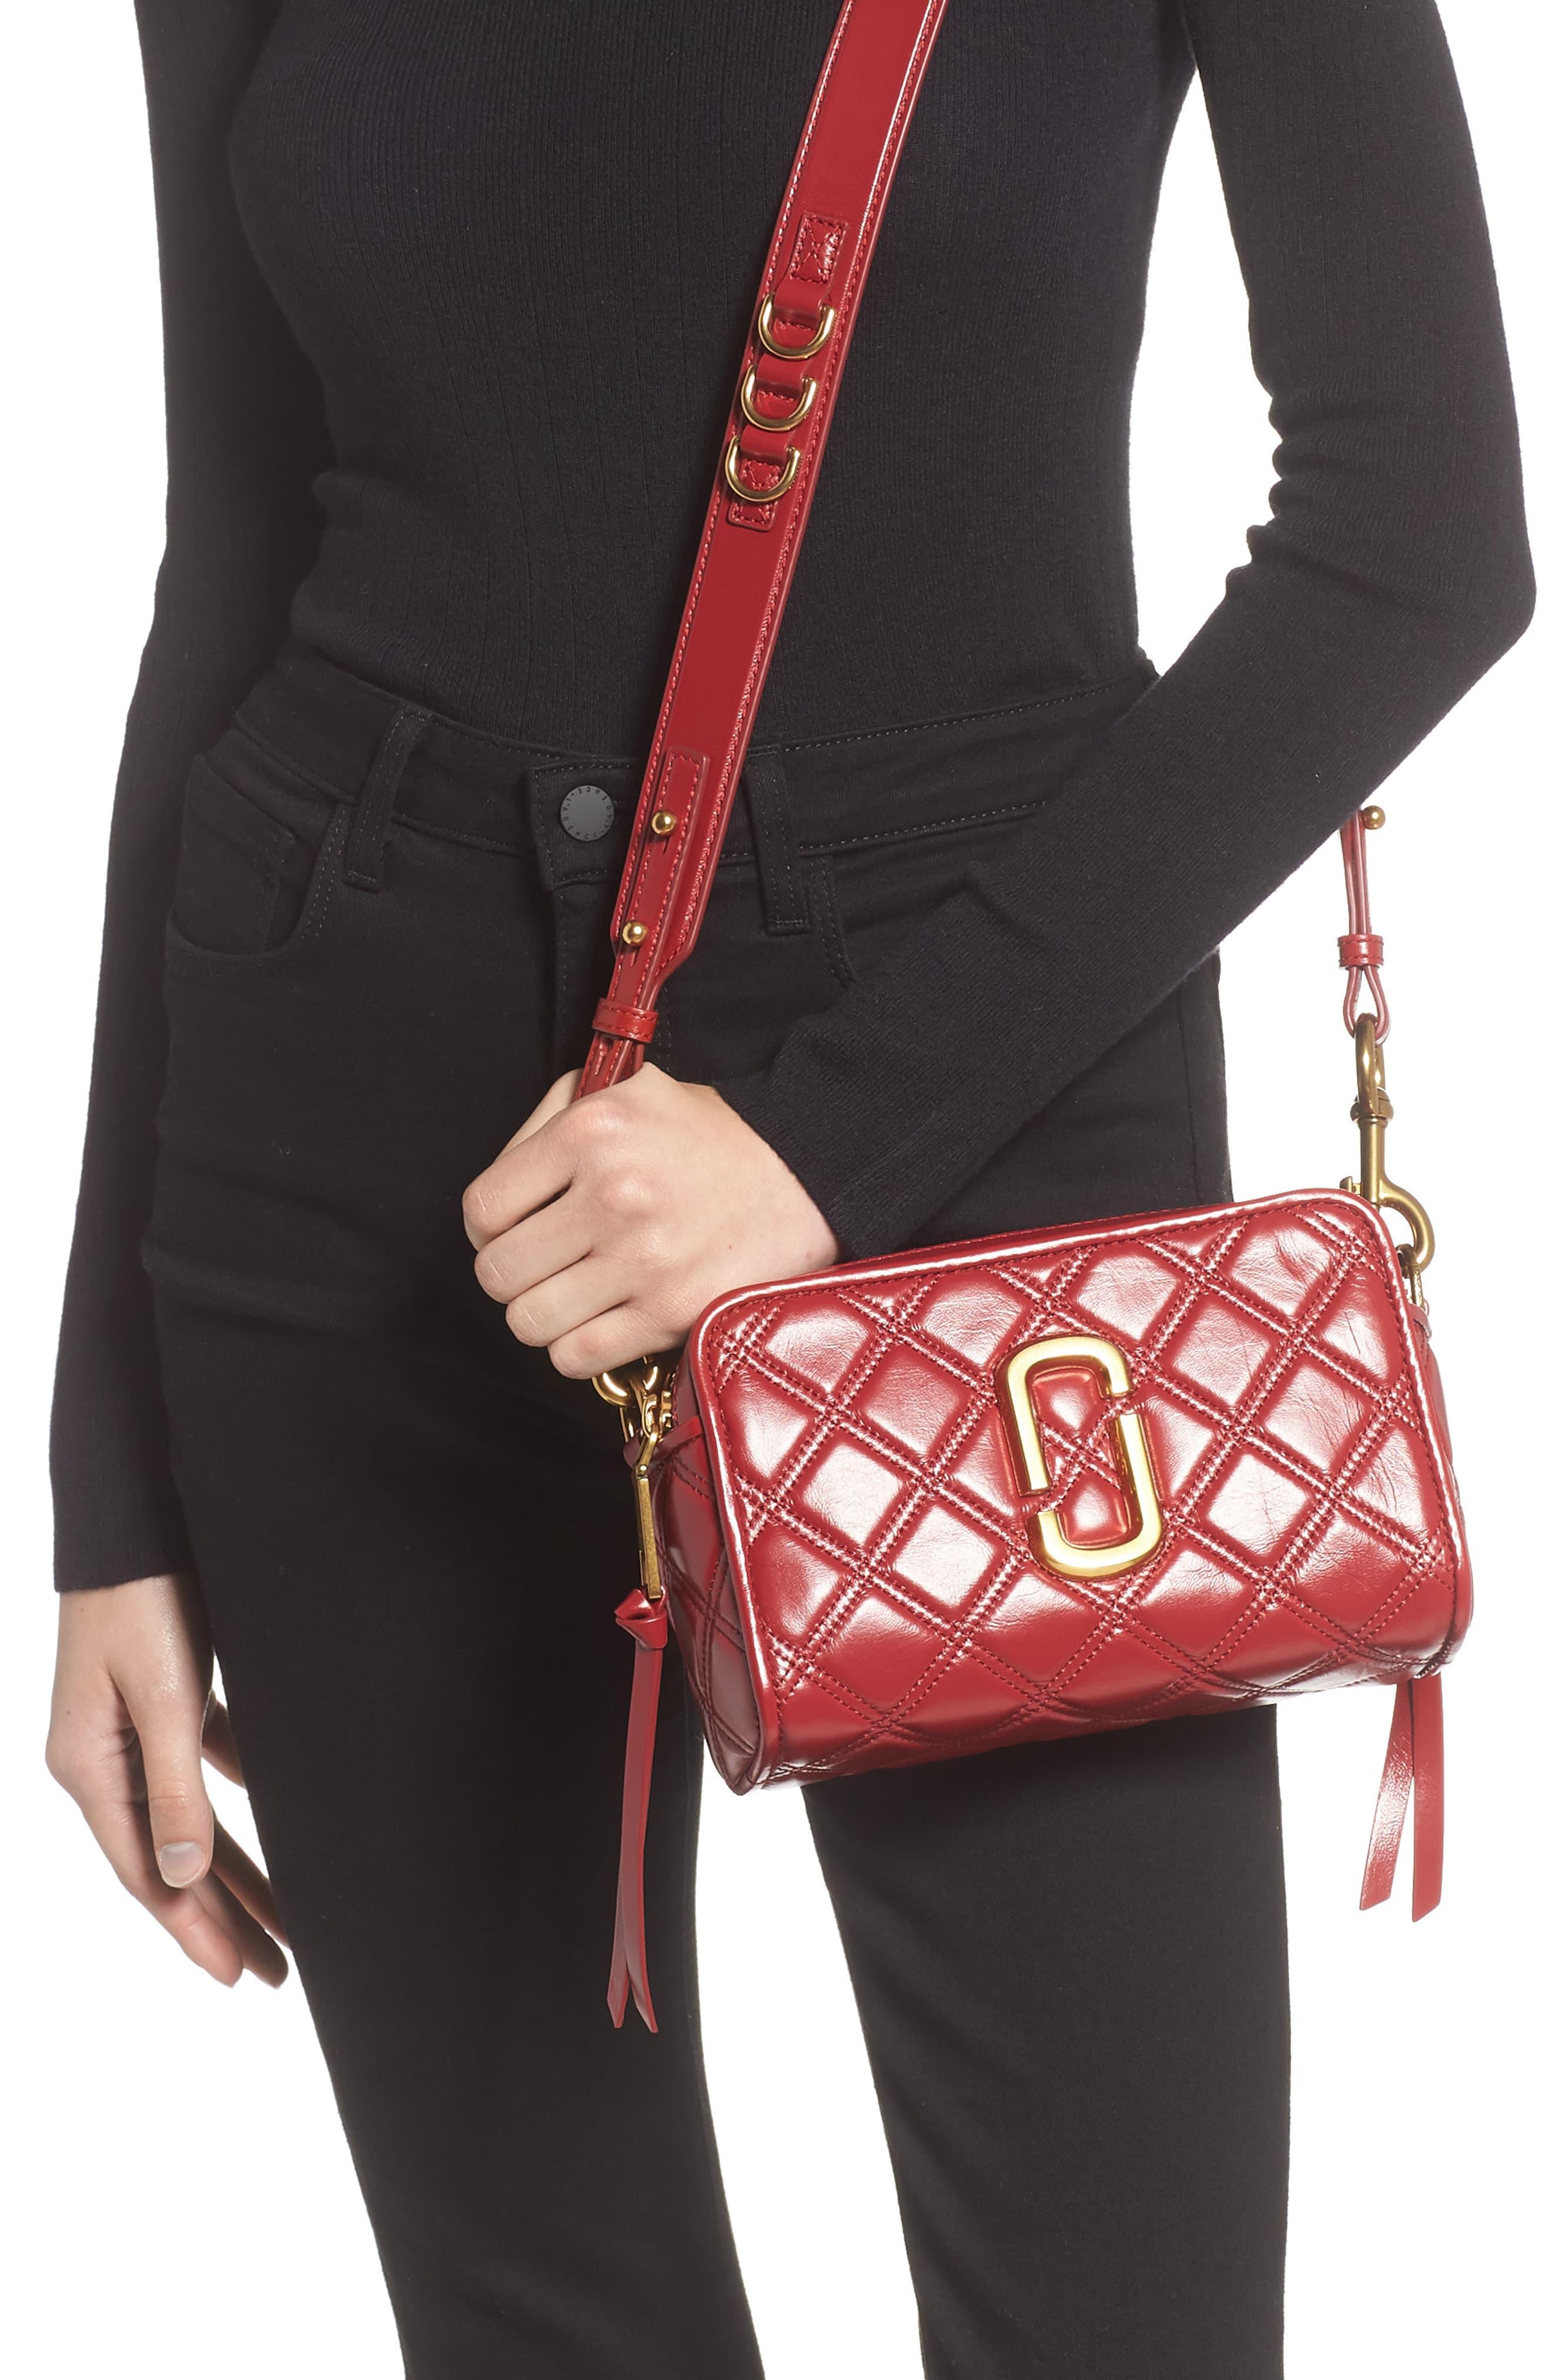 Authentic MARC JACOBS - The Softshot 21 Crossbody Bag In Bright Red Multi